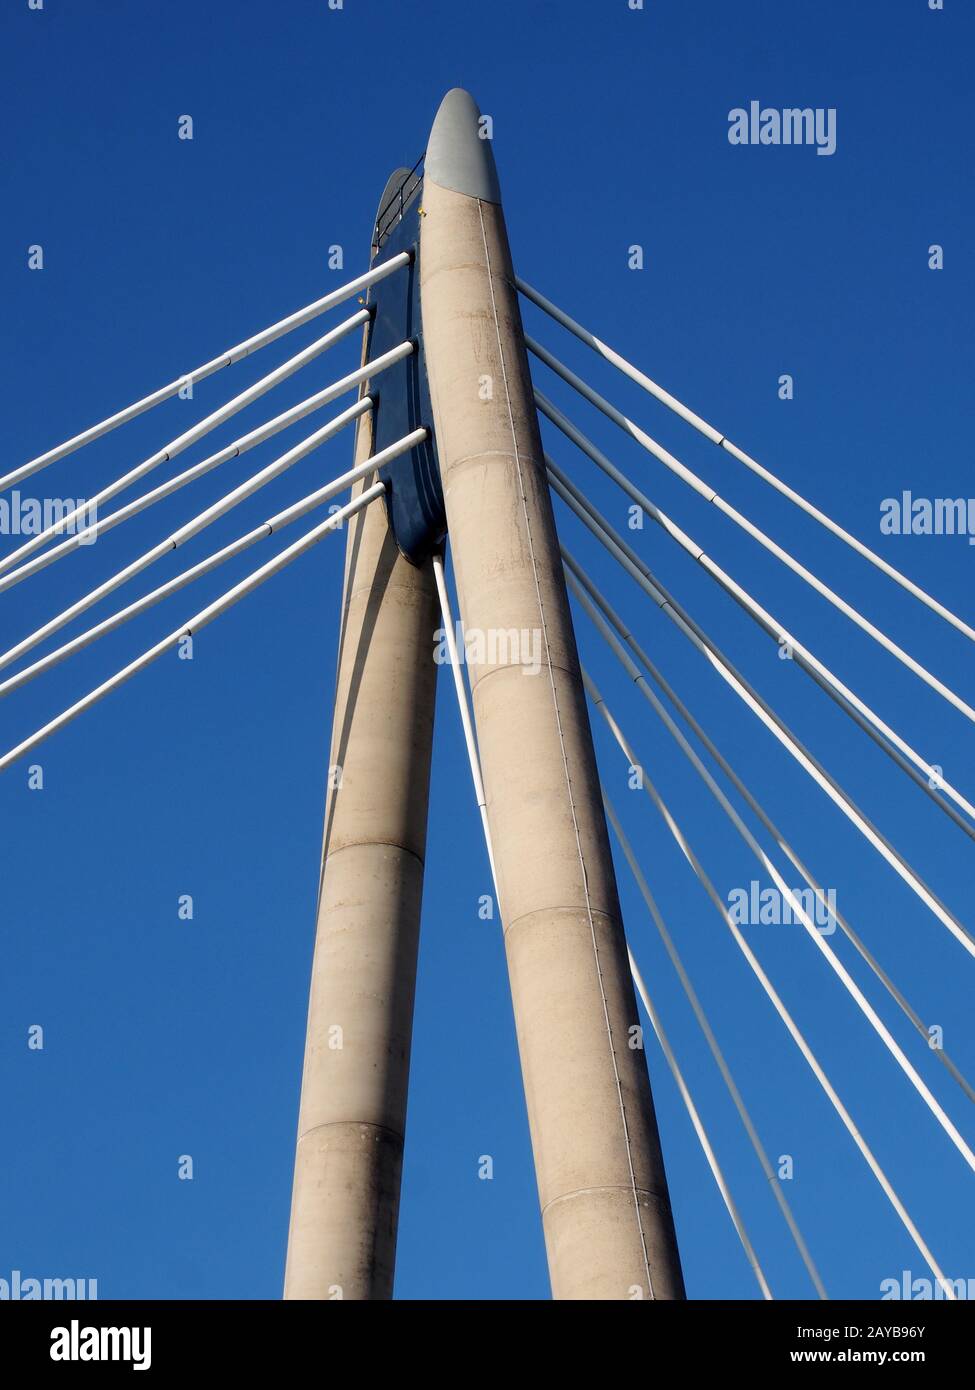 the concrete tower and cables of the suspension bridge in southport merseyside against a blue sky Stock Photo